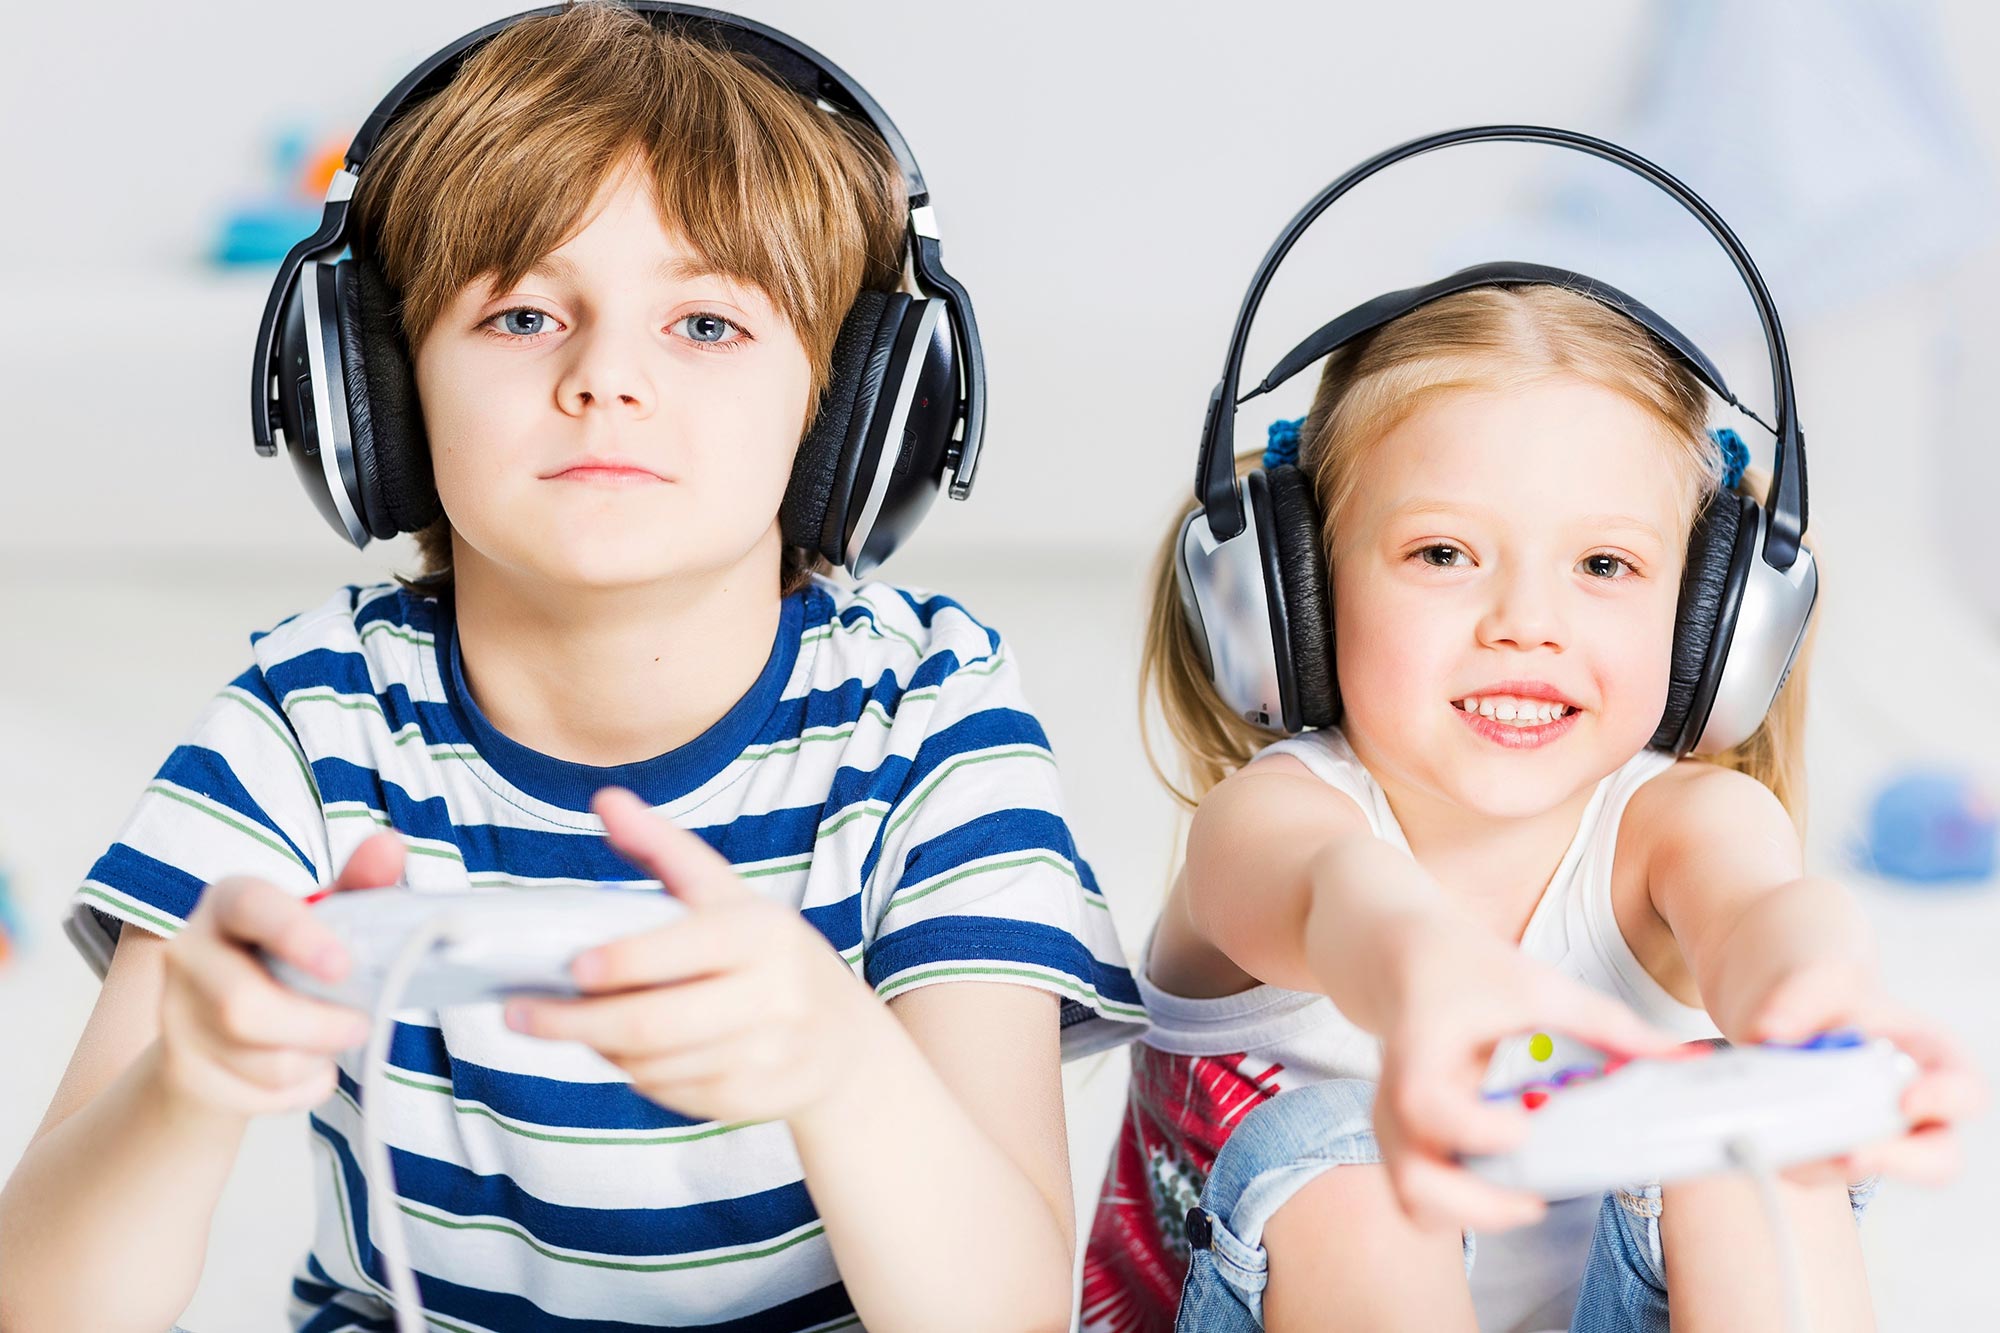 Study Shows Video Games Can Offer Benefits to Kids' Brains